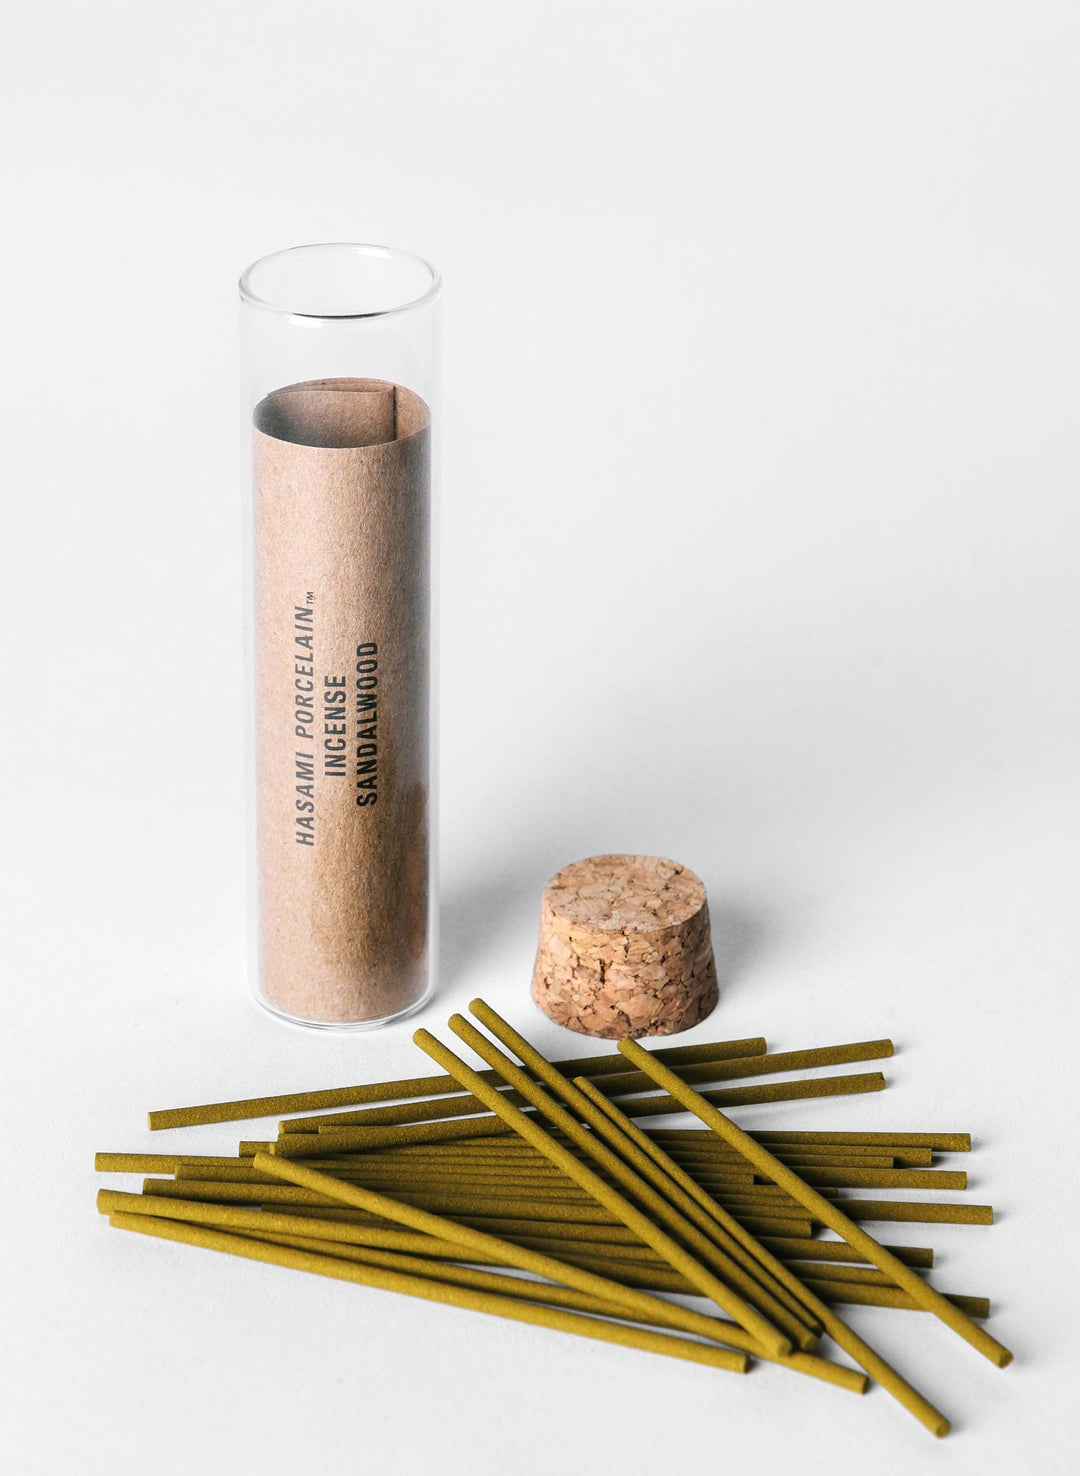 a group of green sticks next to a tube of sandalwood